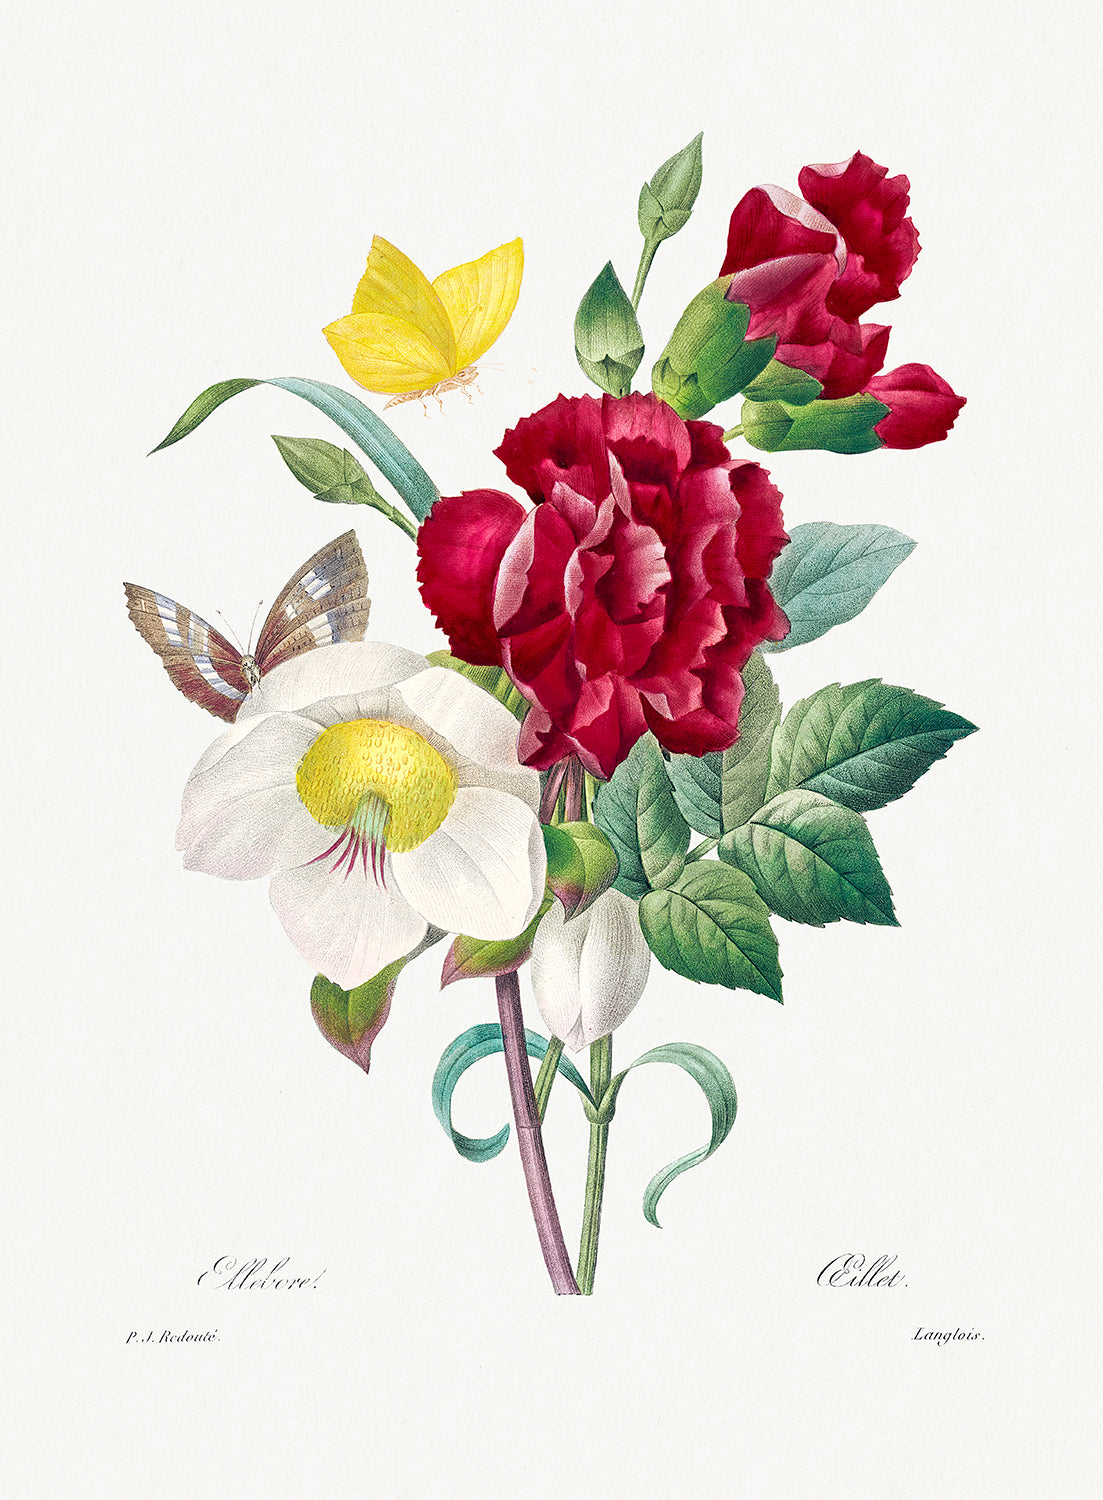 Botanical Plant Print - Hellebore and Oeillet by Pierre Joseph Redoute